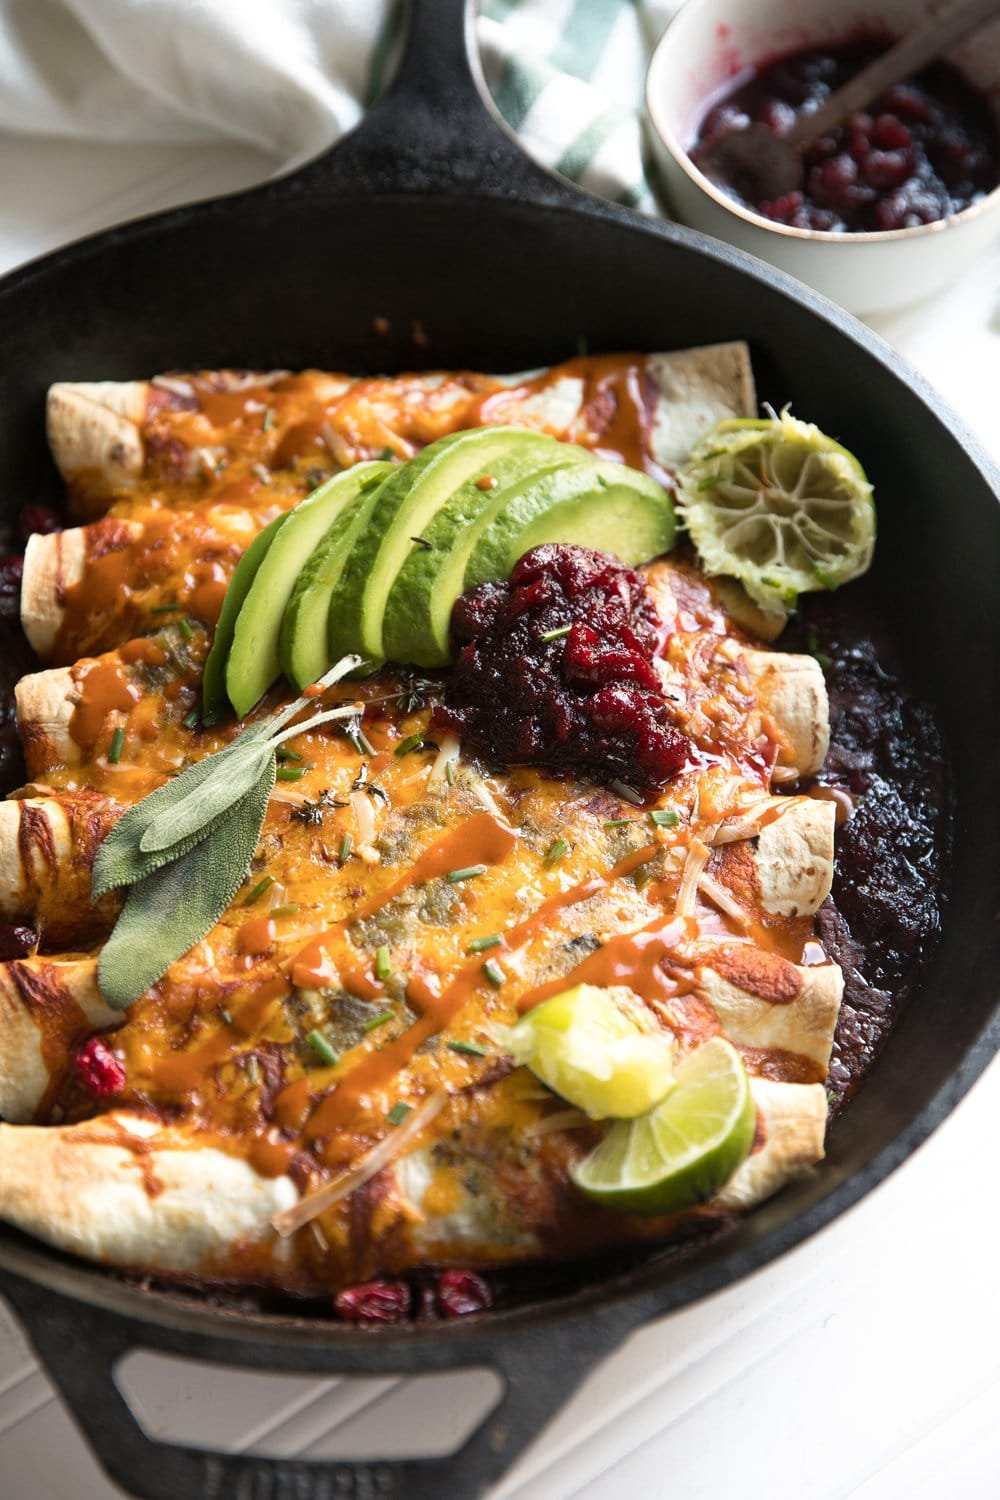 Leftover Thanksgiving Enchiladas filled with turkey, stuffing, leftover vegetable casserole, cheese, and cranberry sauce.